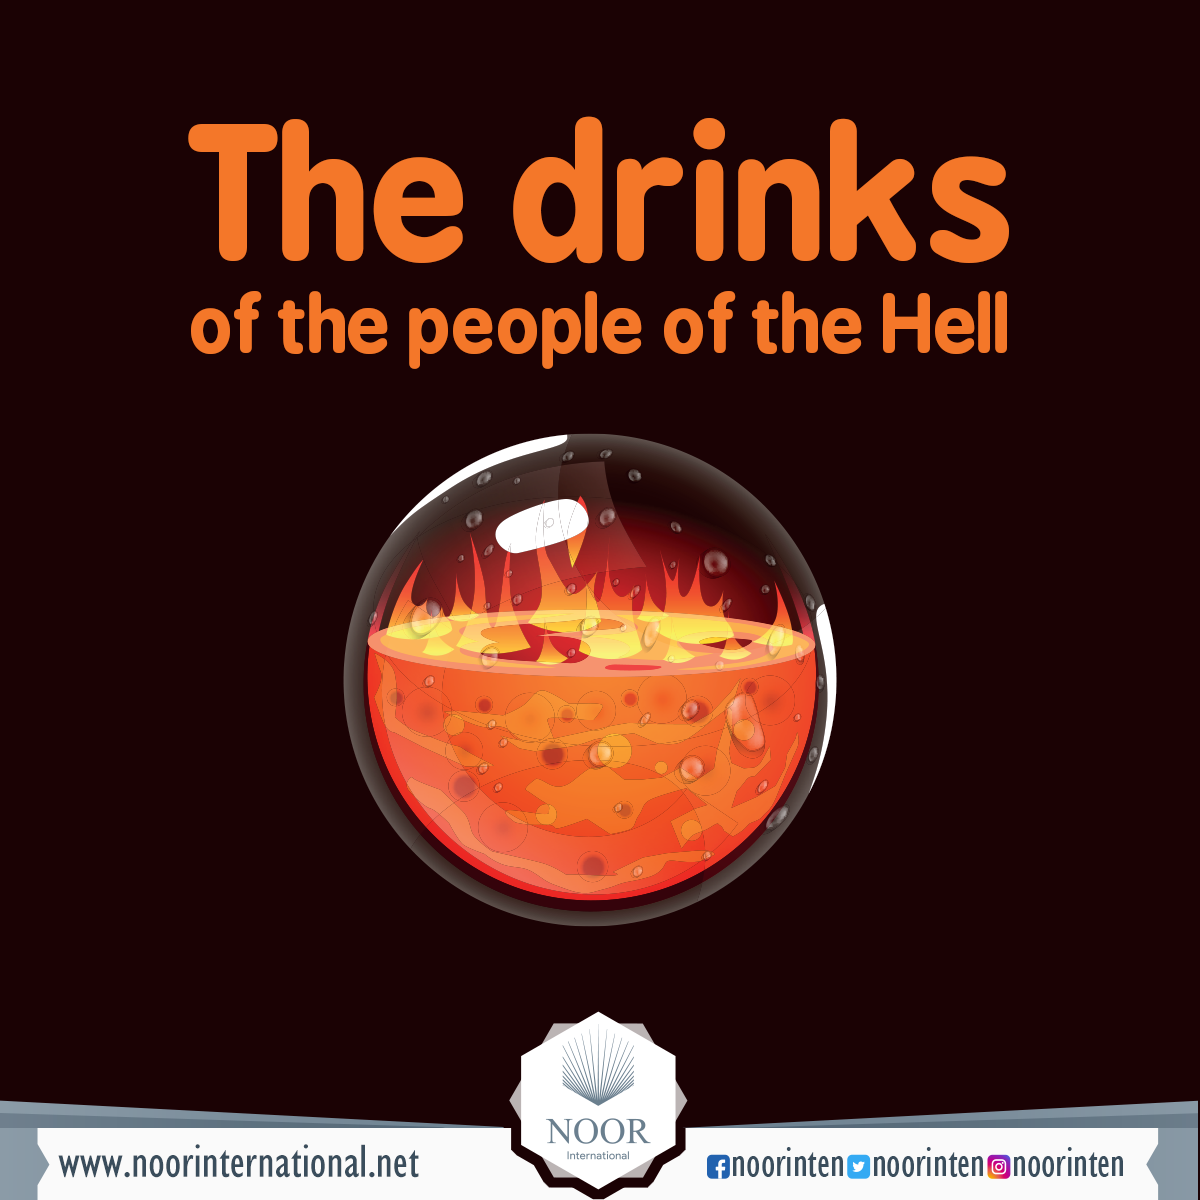 The drinks of the people of the Hell